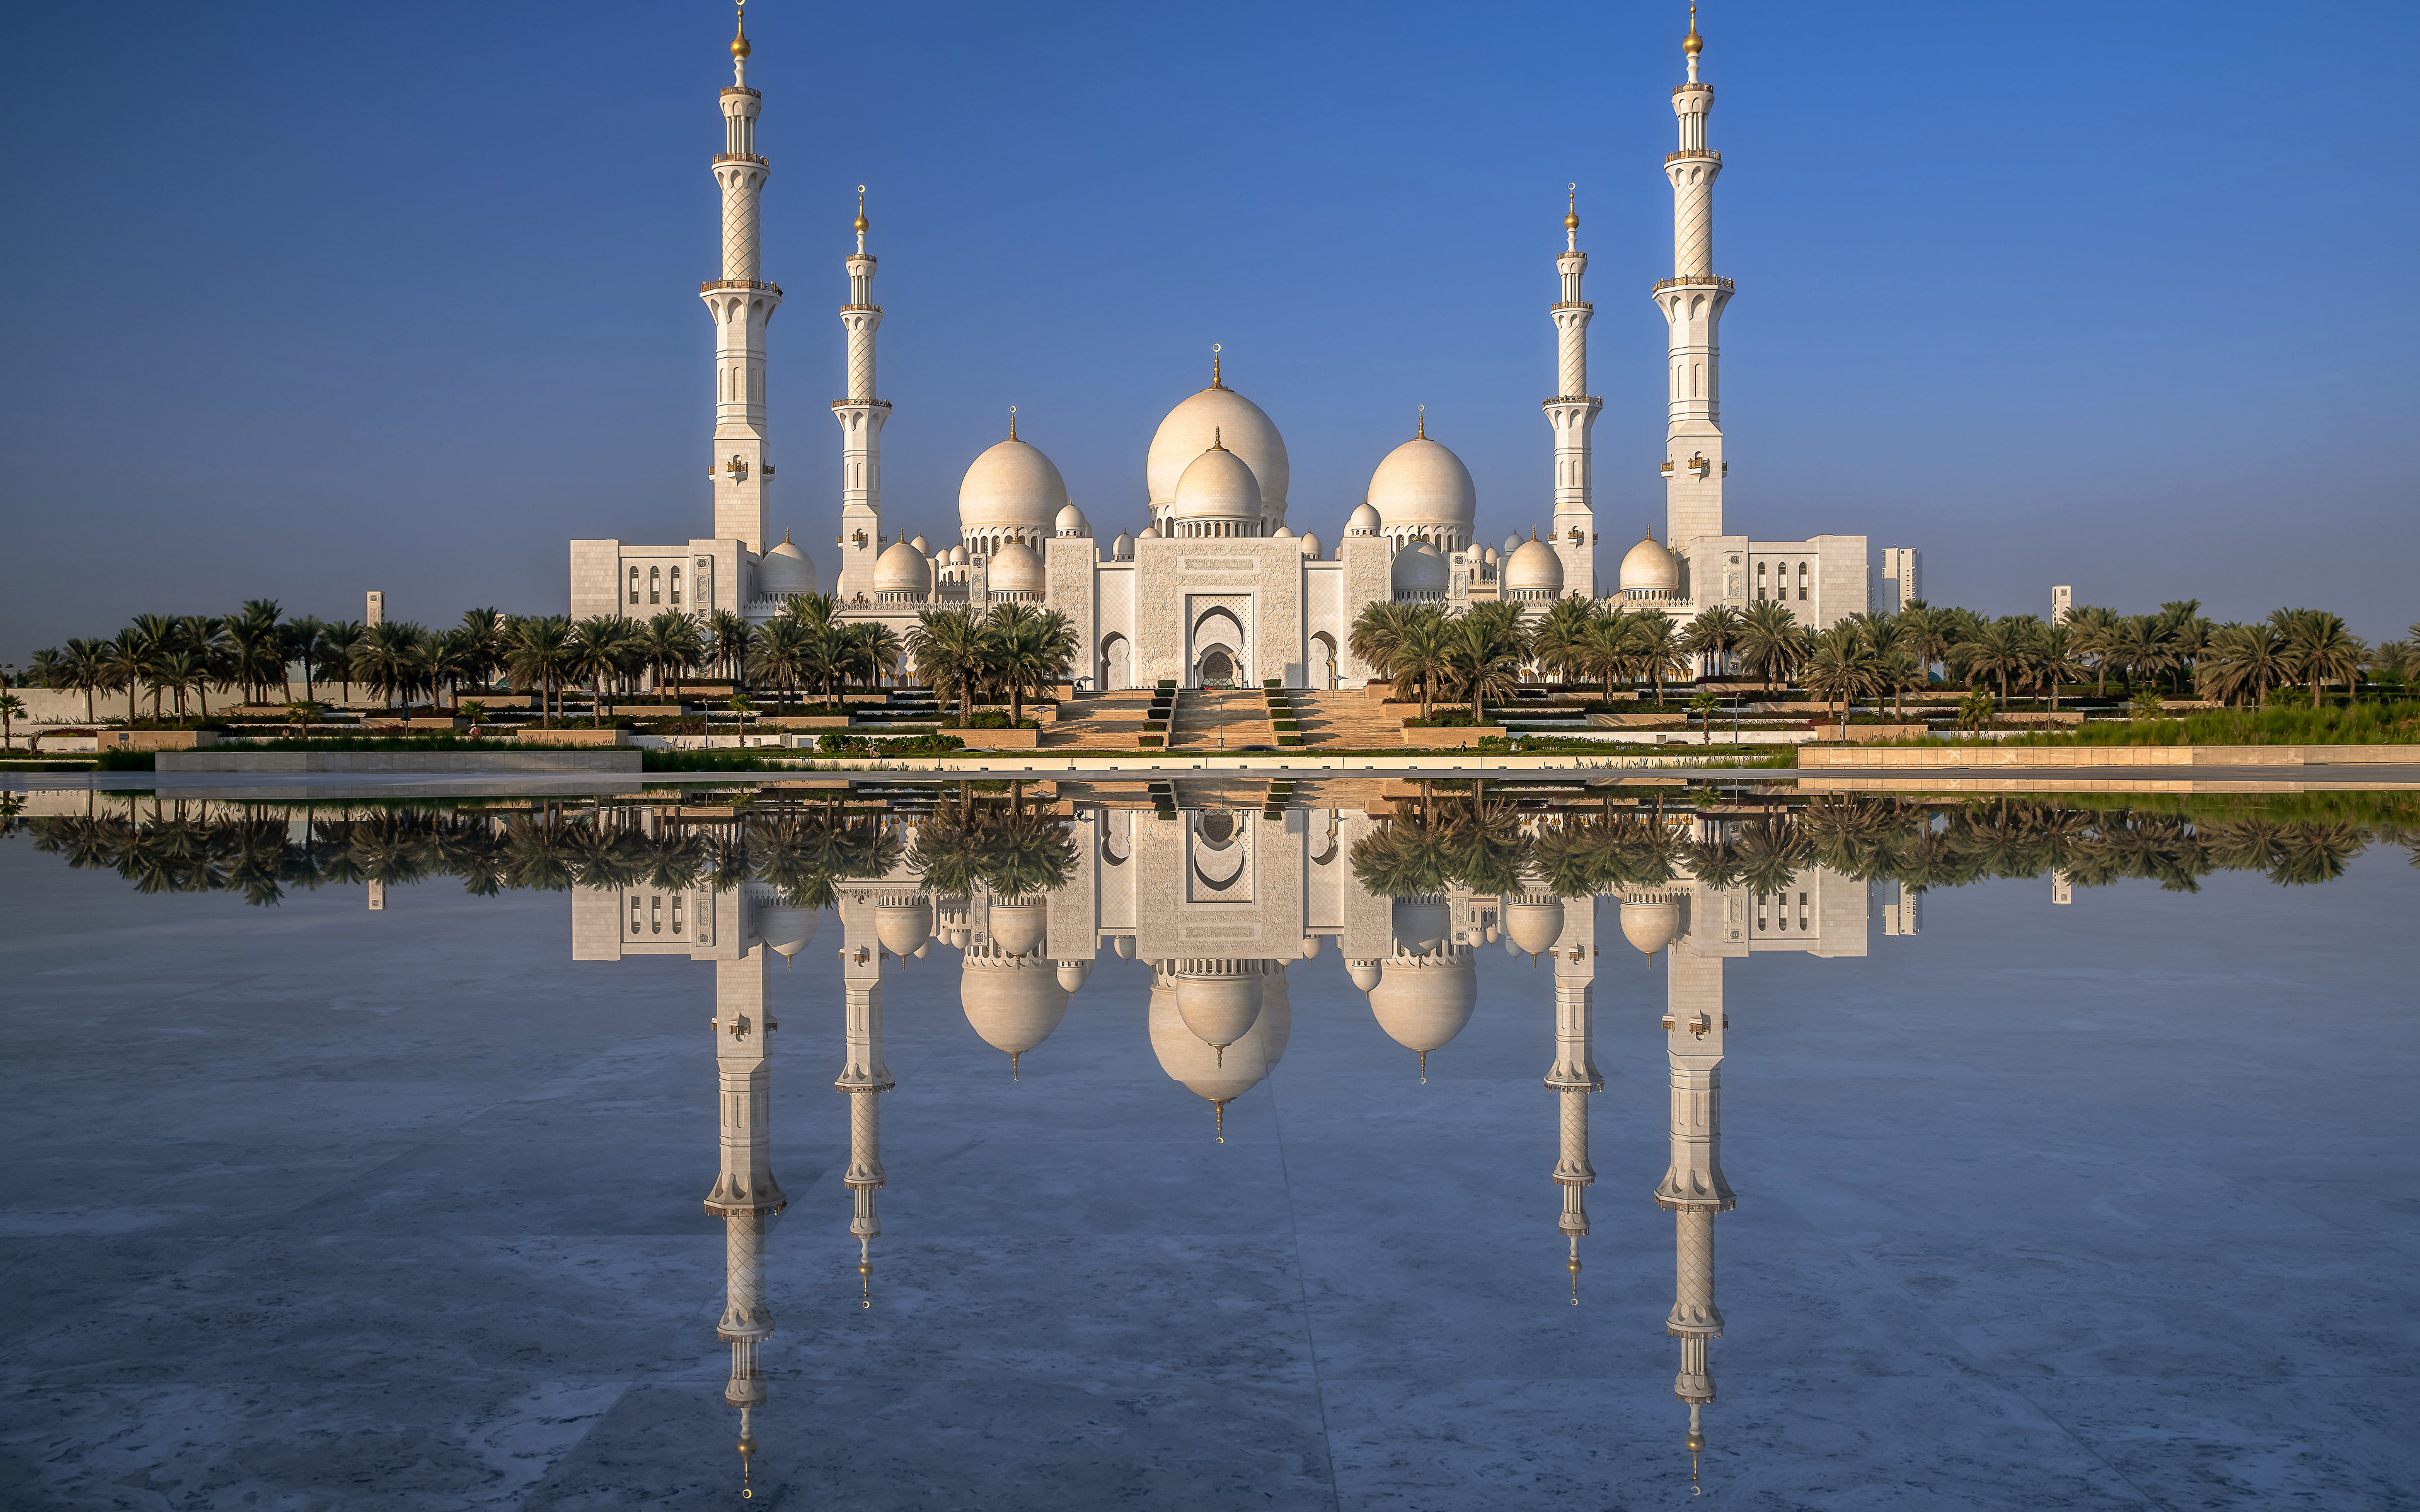 Images Mosque Emirates UAE Sheikh Zayed Grand Mosque, Abu Dhabi Reflection Cities 3840x2400 reflected